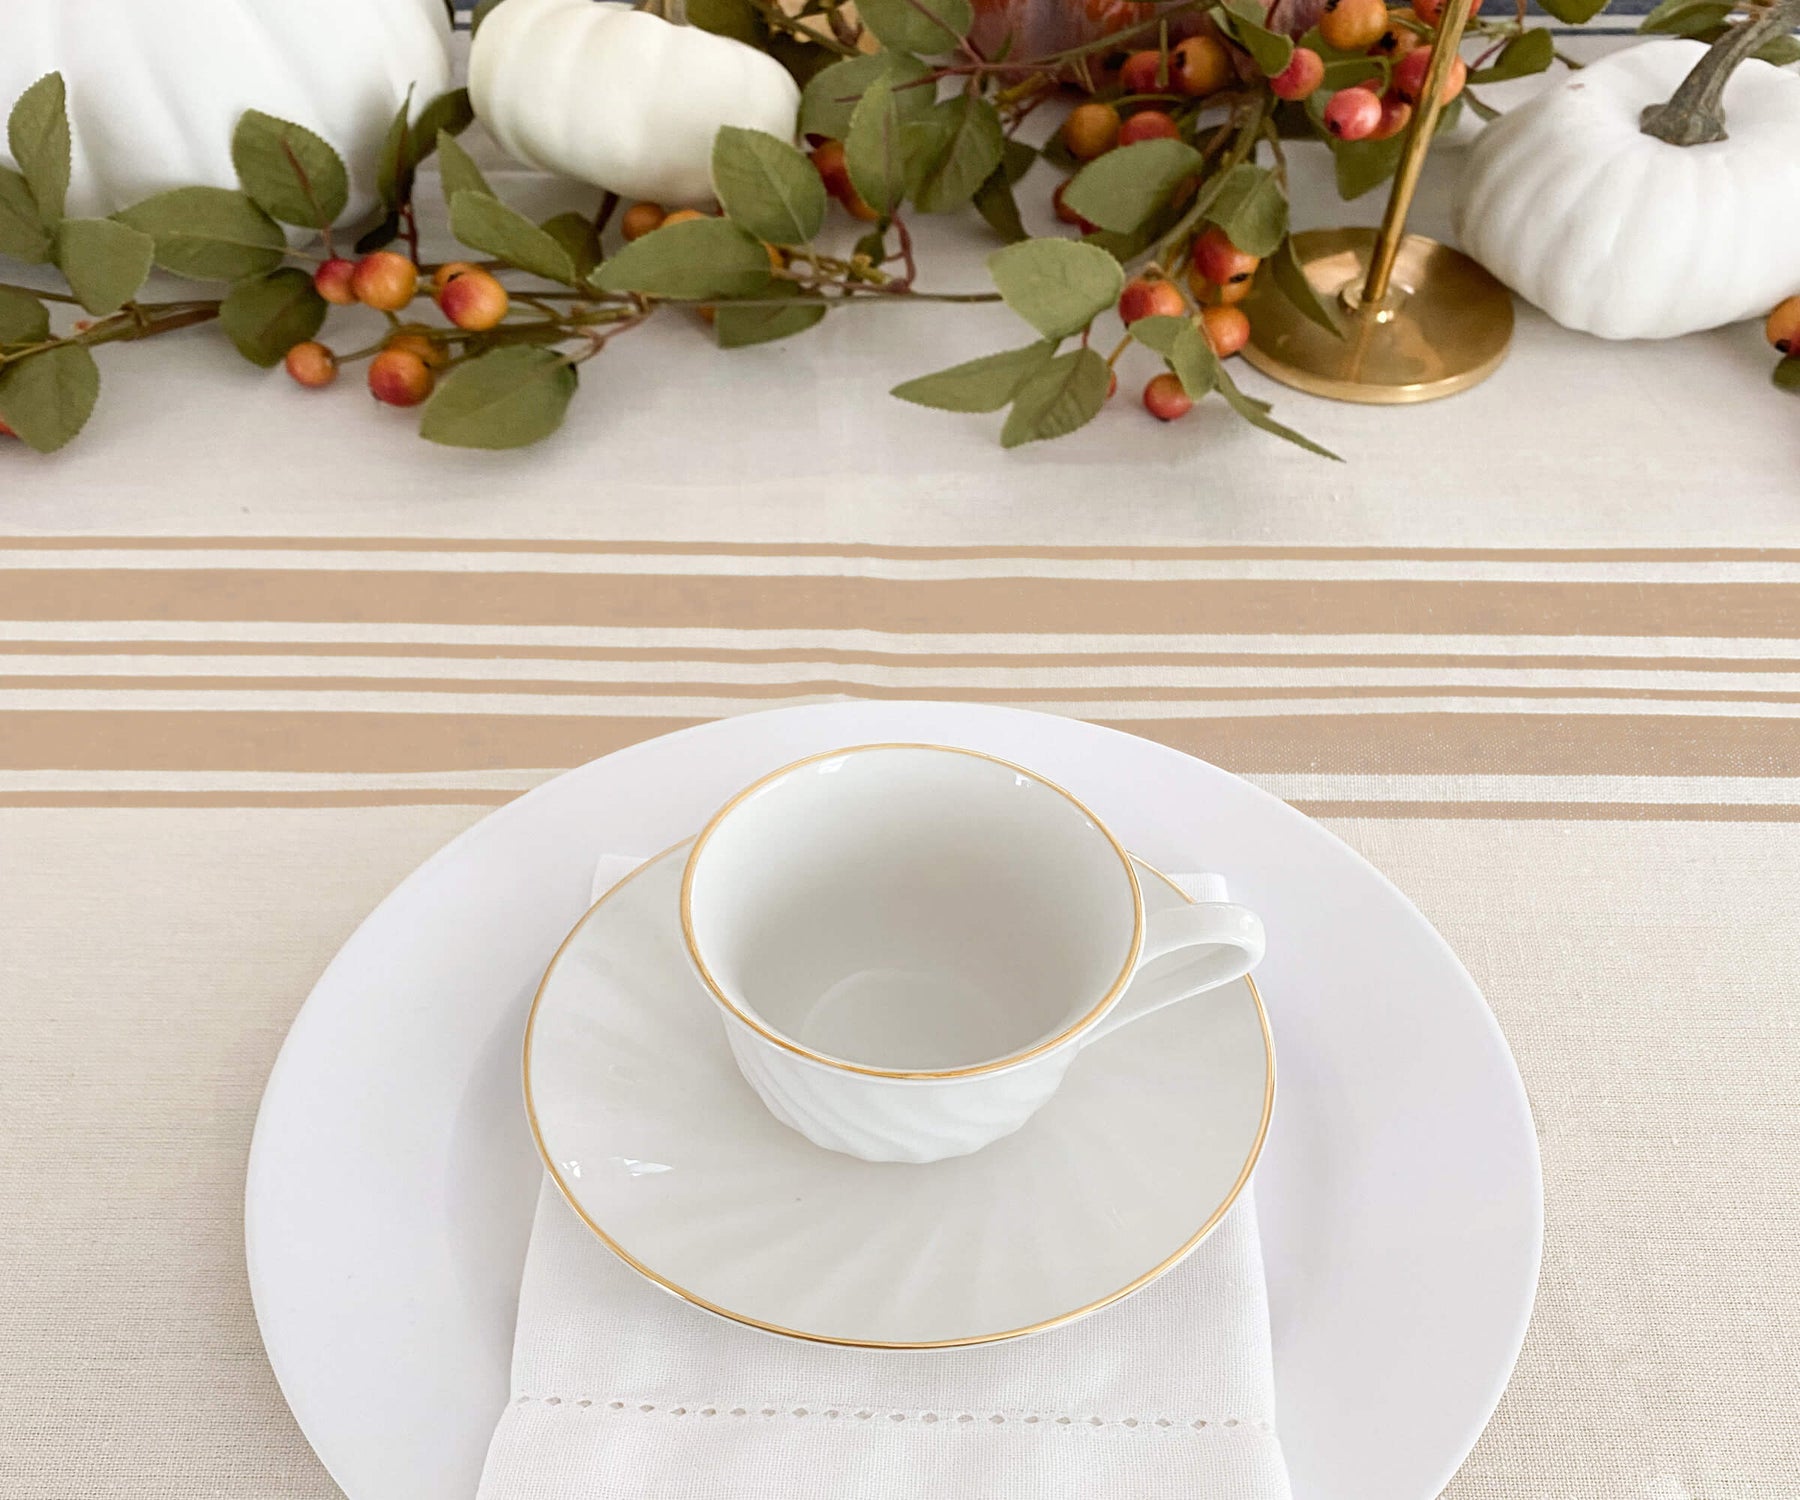 The 60-inch round beige tablecloth combines practicality and style, creating a welcoming and visually appealing dining environment.